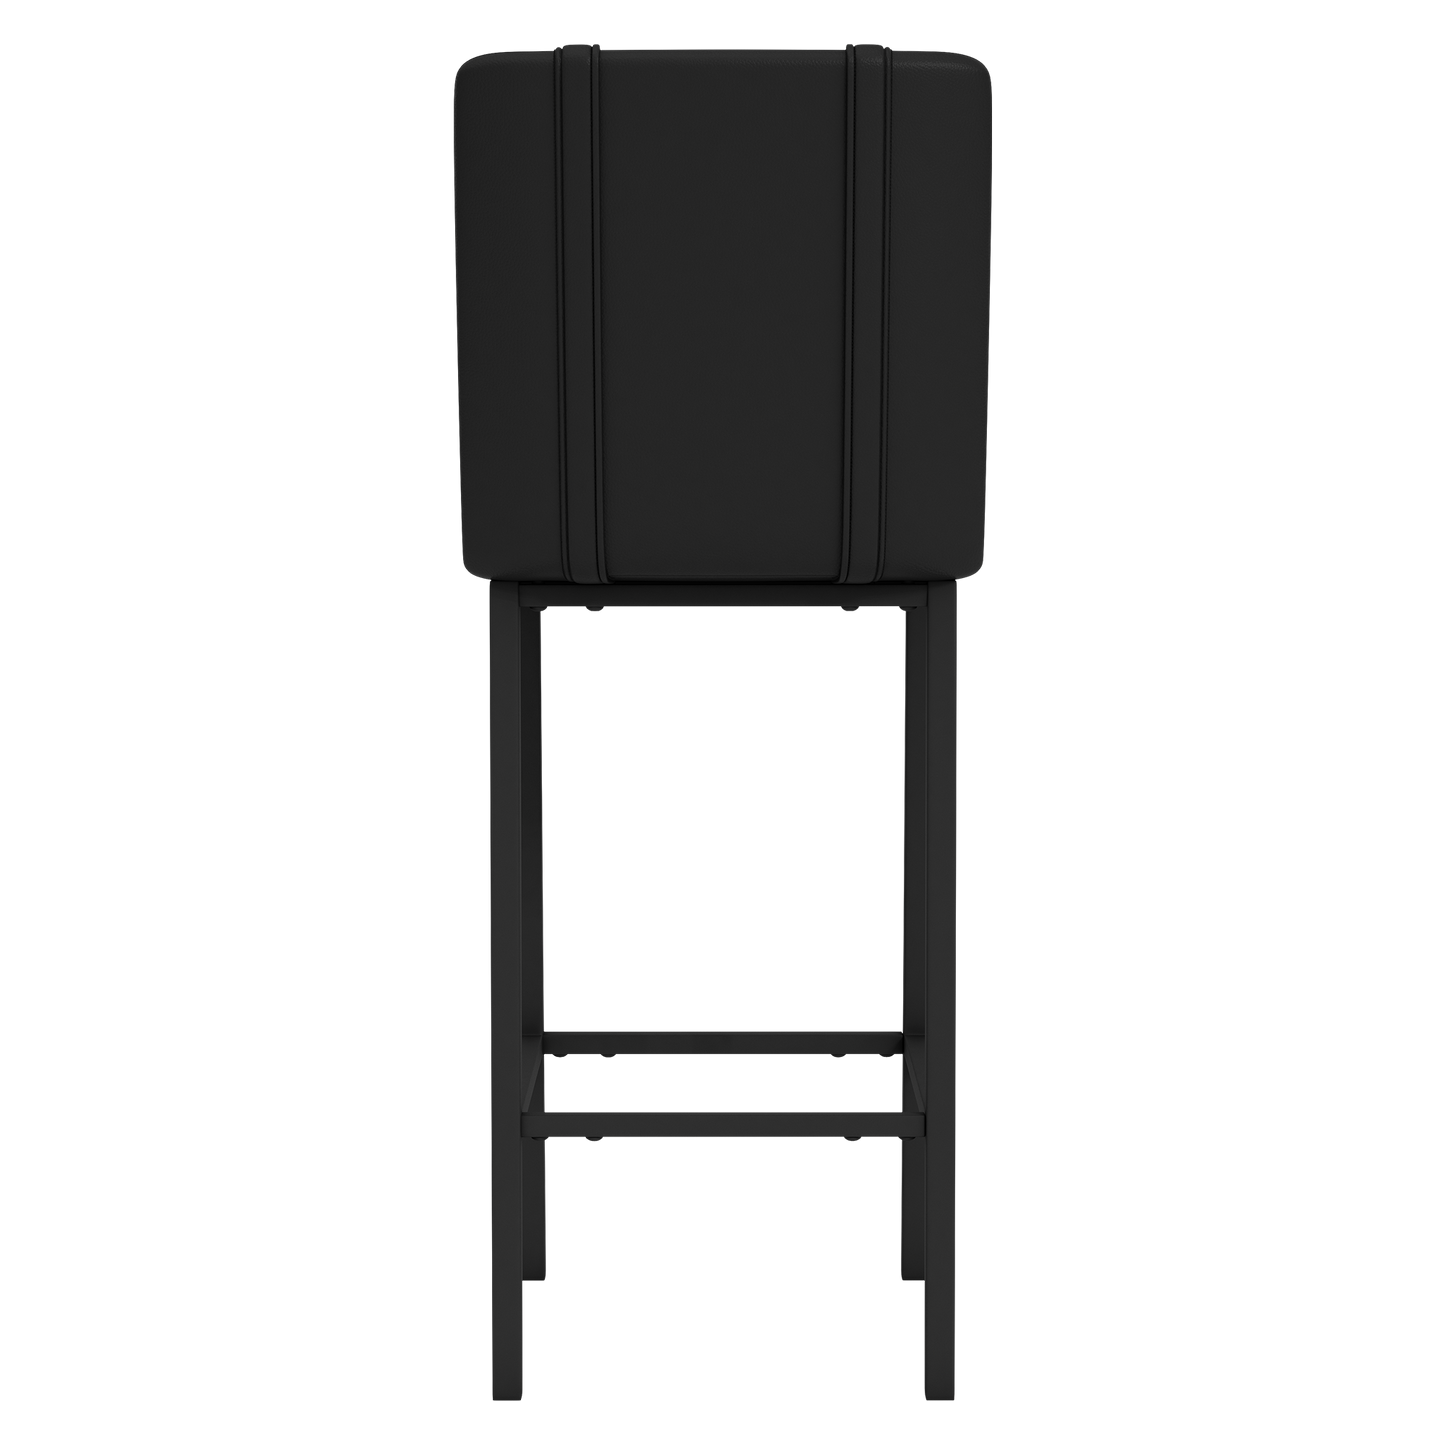 Bar Stool 500 with TCU Horned Frogs Alternate Set of 2